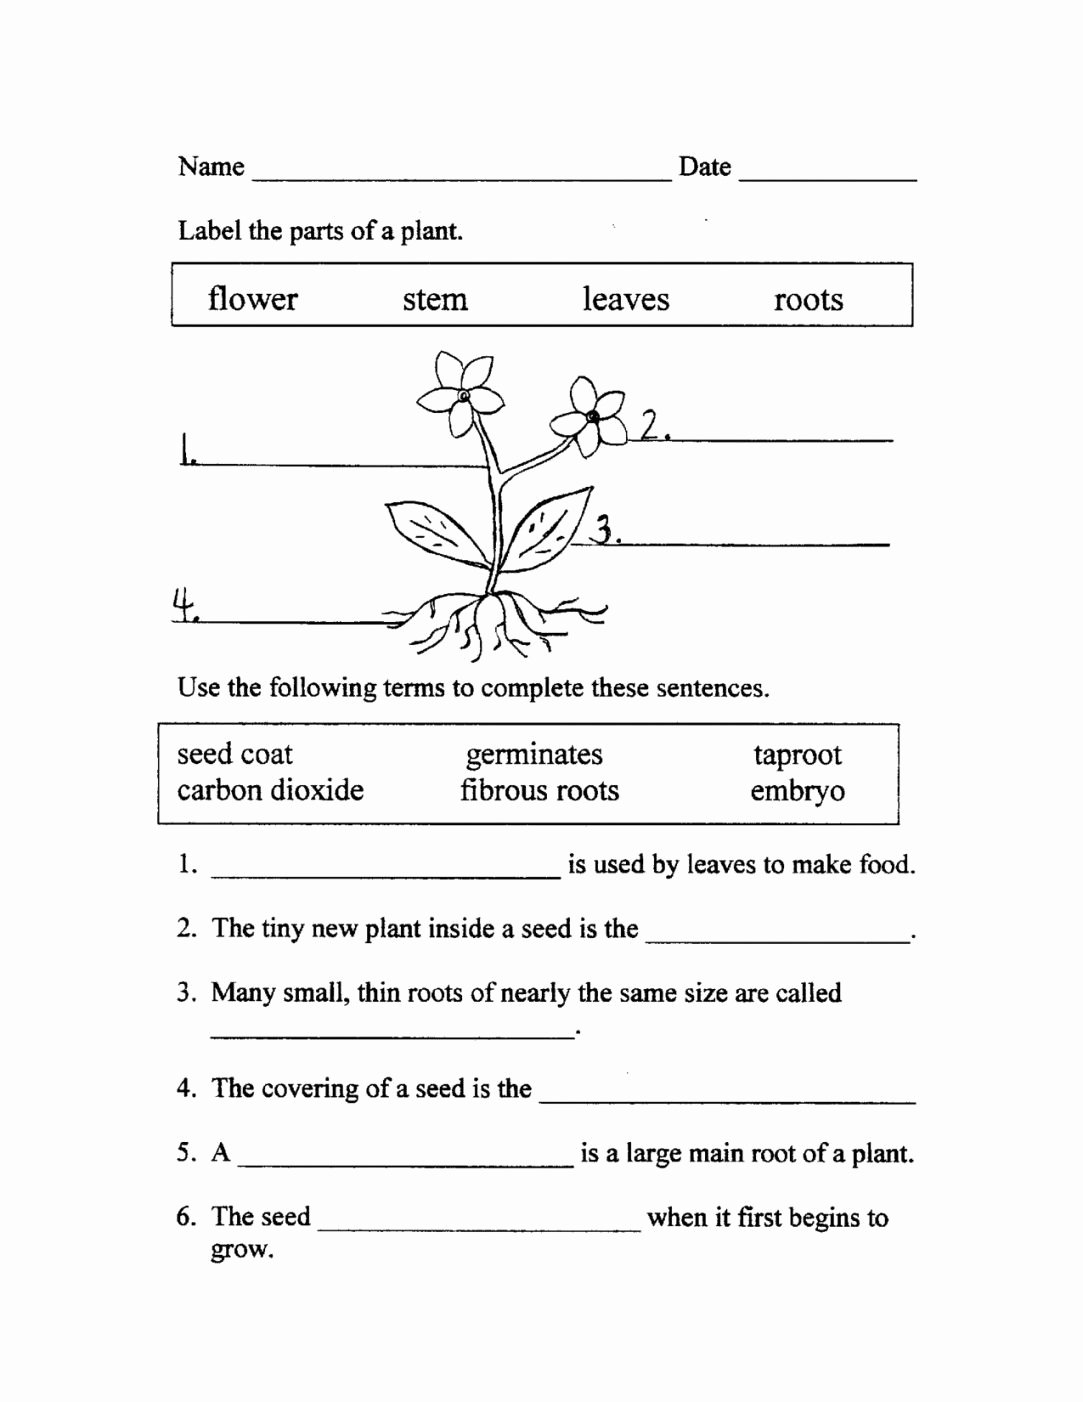 Plant Parts and Functions Worksheet Inspirational Flower Parts Printable Worksheet Flowers Healthy